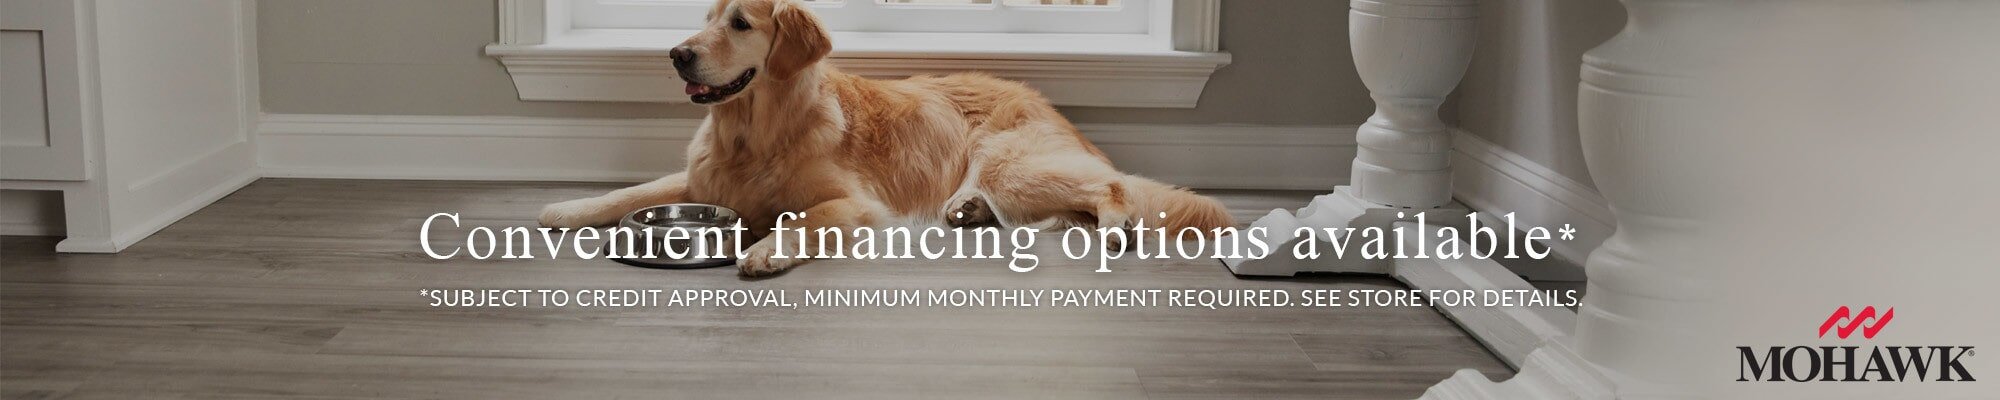 Mohawk convenient financing options for your new flooring from Vonderheide's Floor Coverings Co.